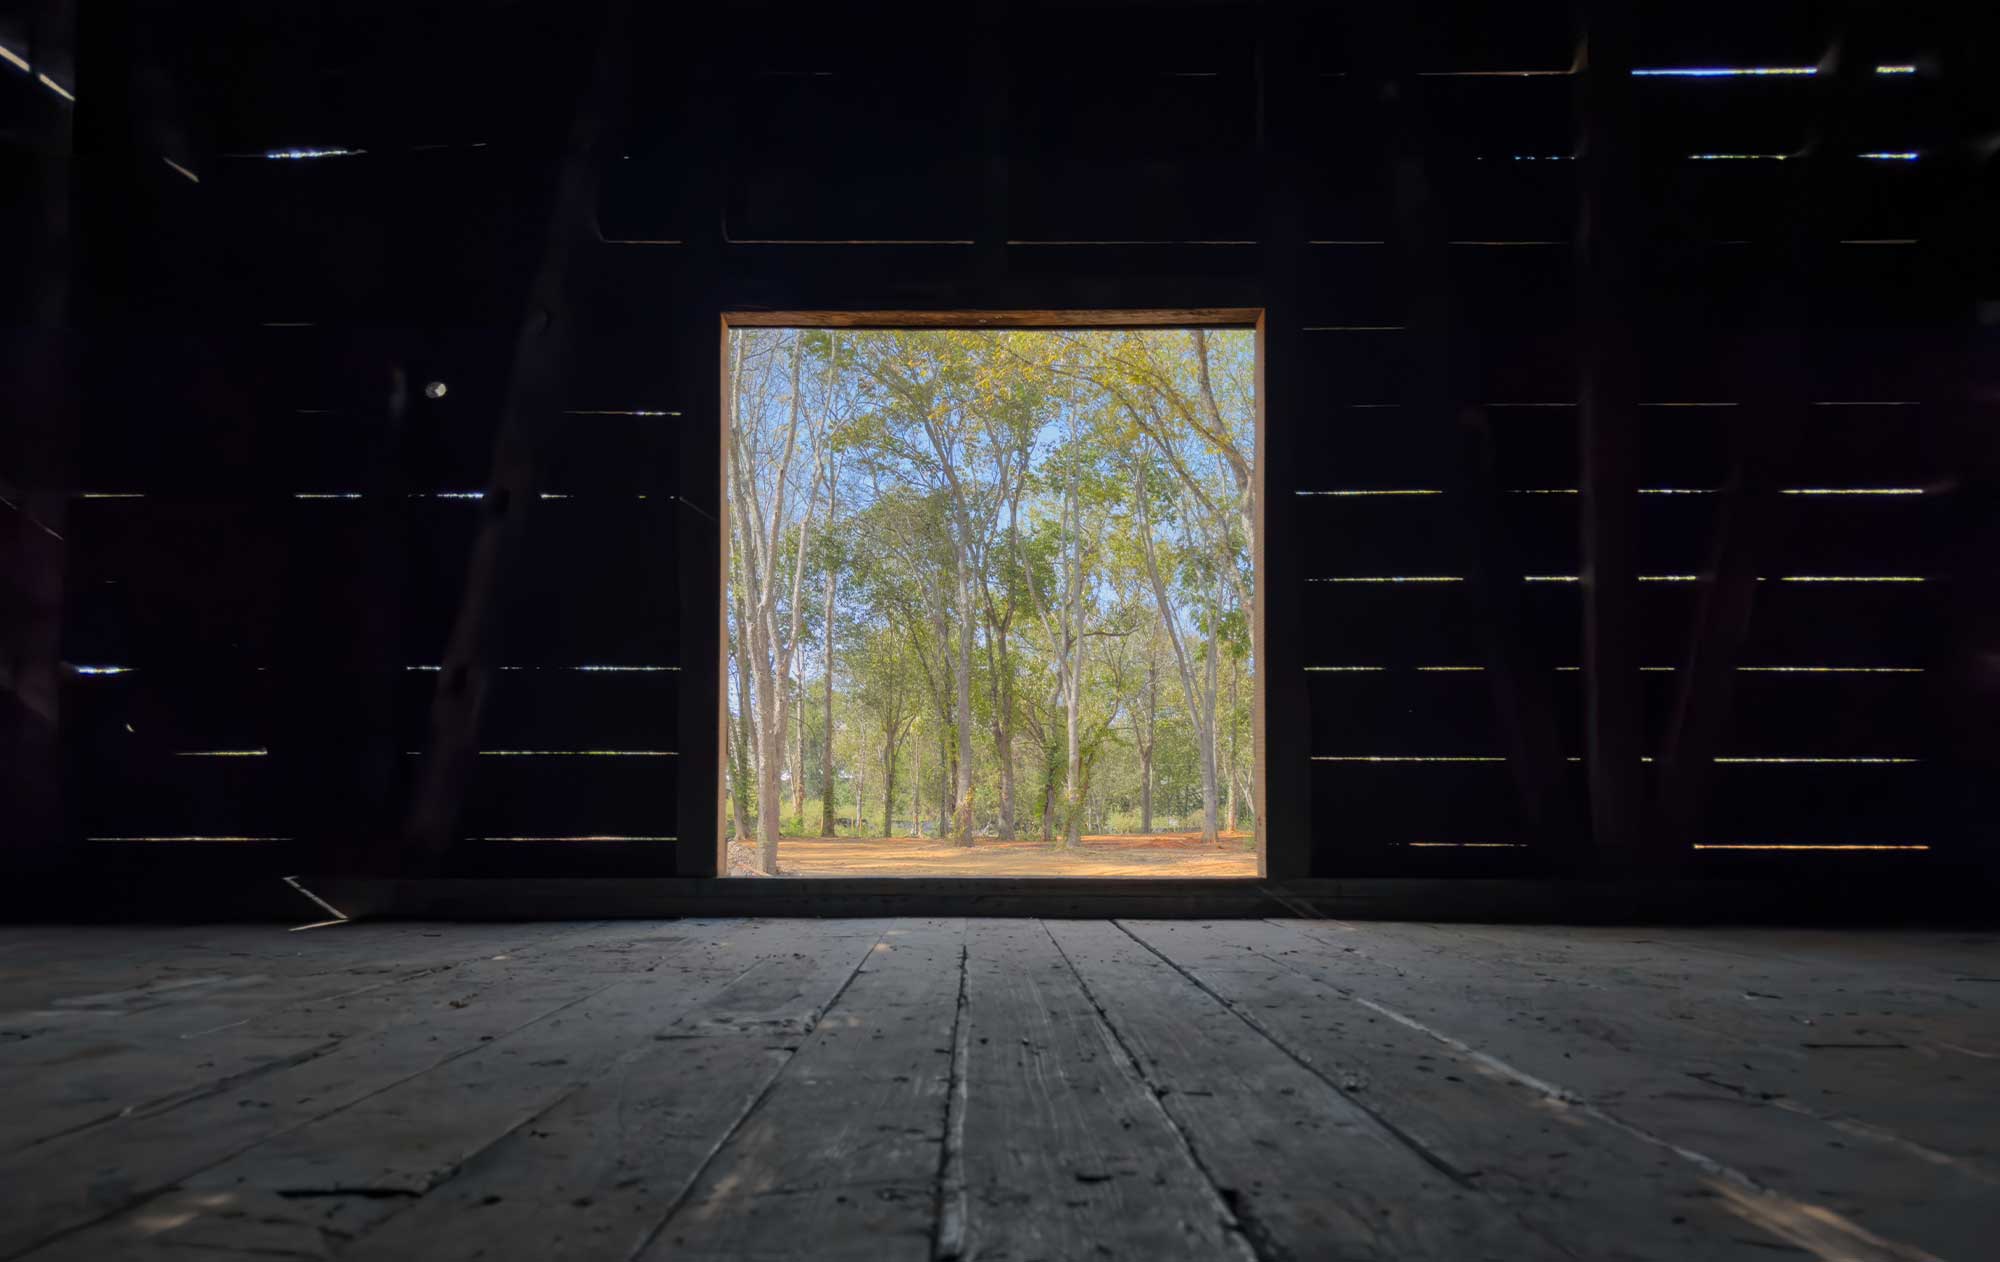 An image of green trees against a blue sky taken from inside and framed by the doorway of a dwelling inhabited by enslaved people.